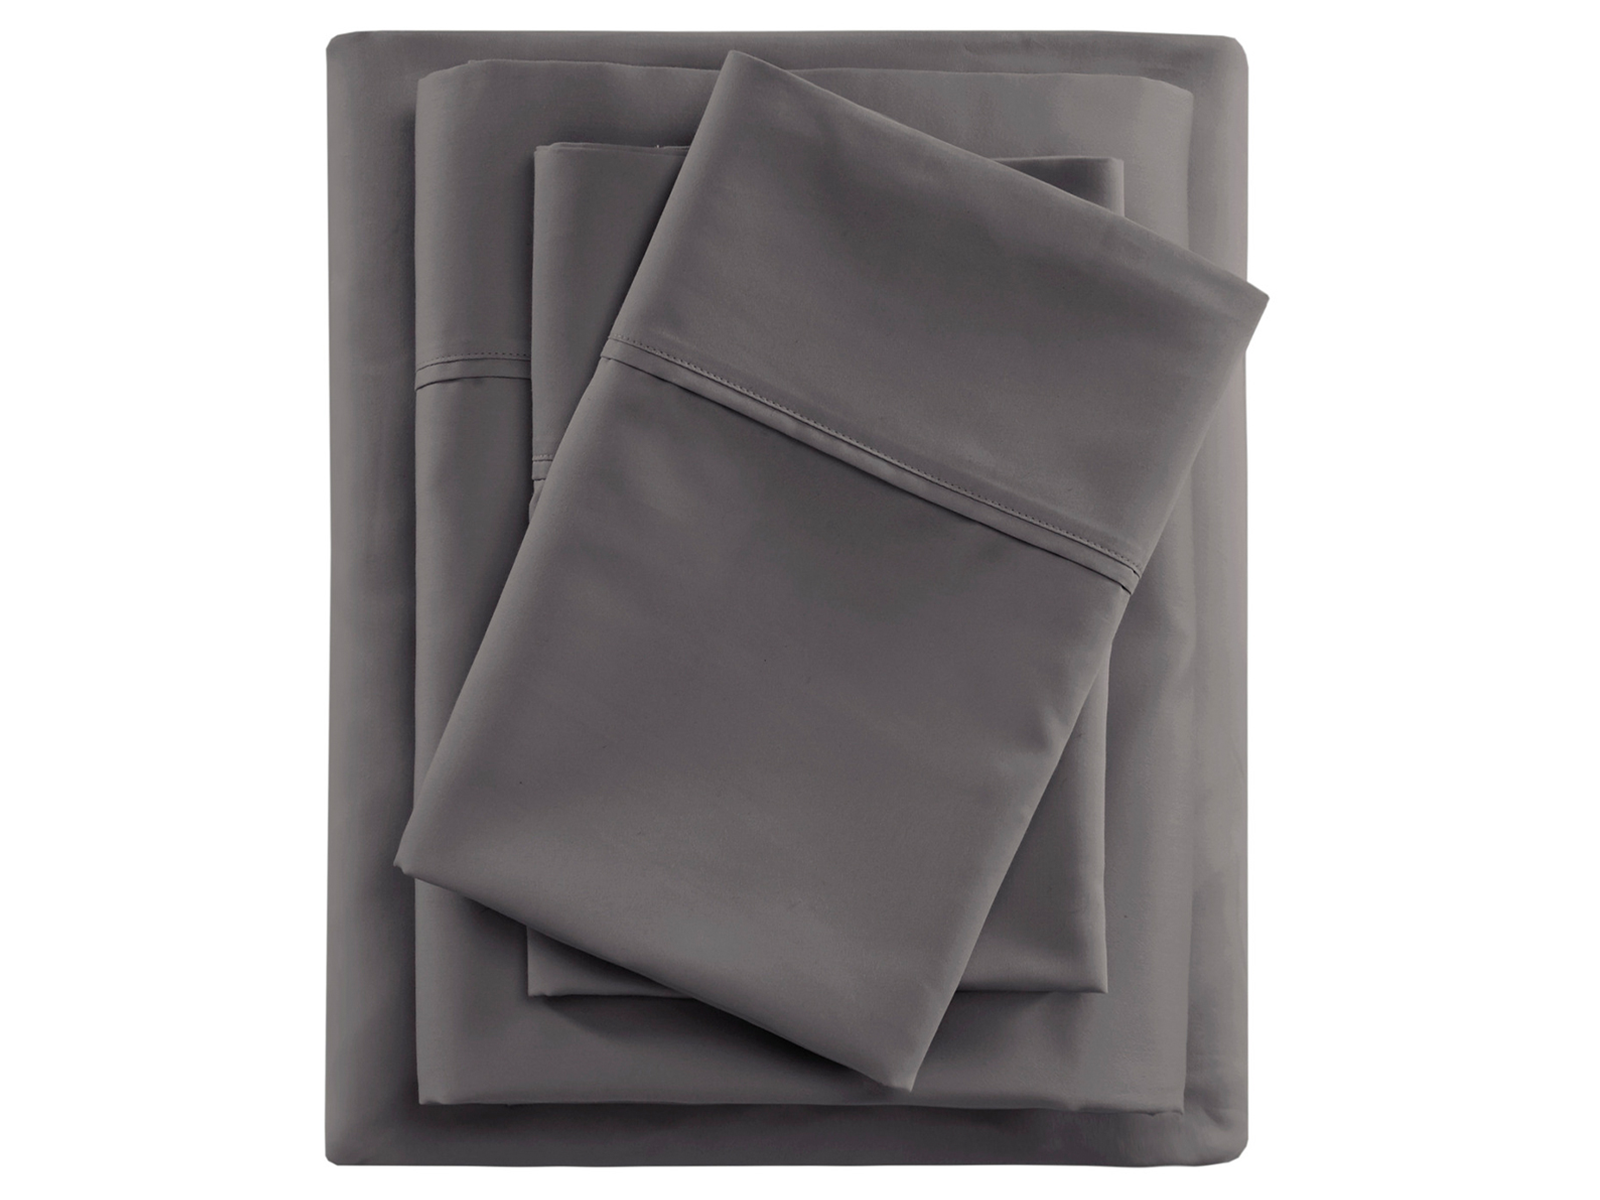 BeautyRest California King 600 Thread Count Cooling Cotton Sheet Set | Charcoal